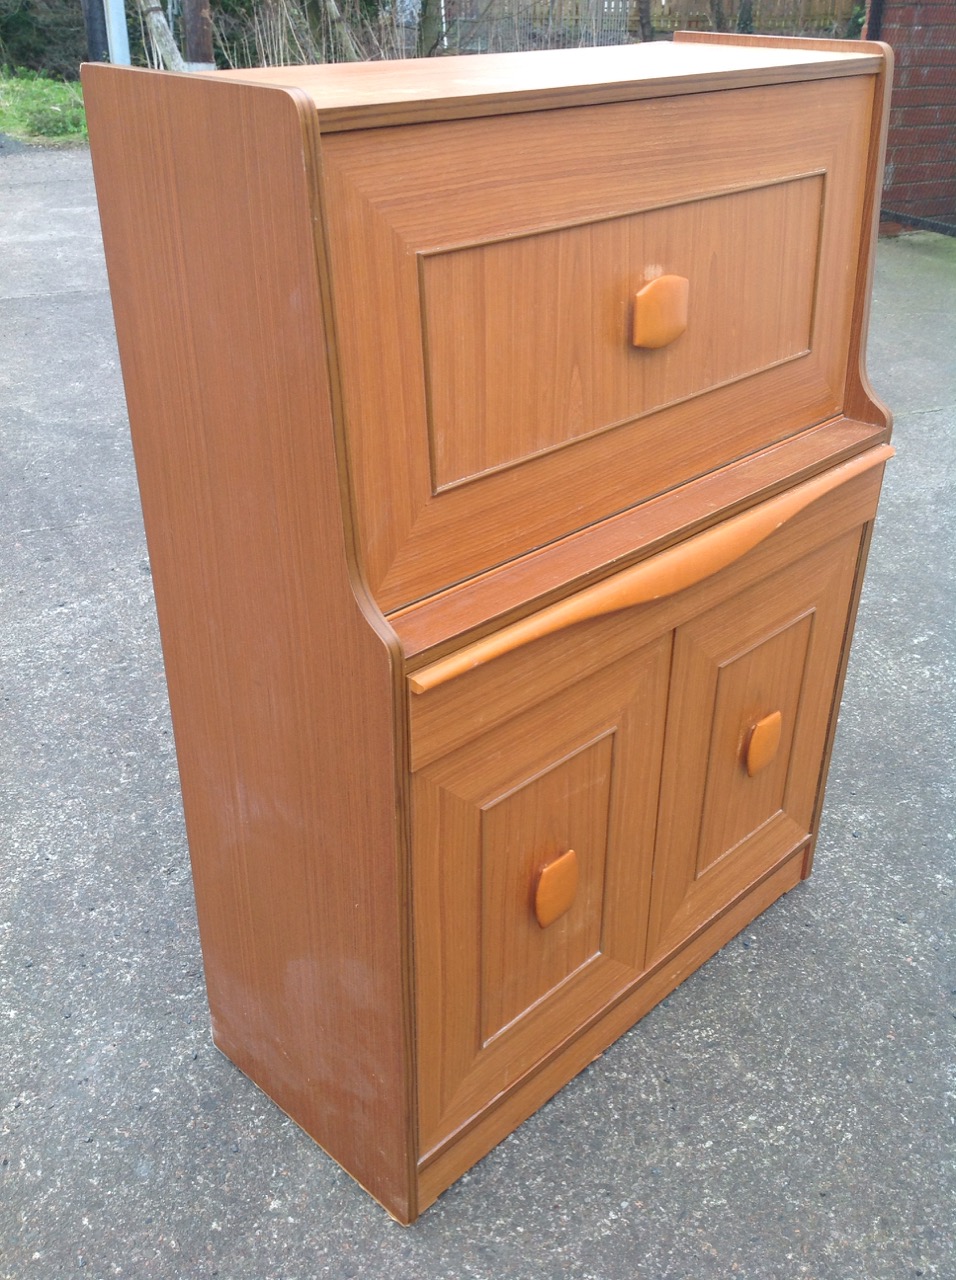 A 70s teak bureau with panelled fallfront - Image 2 of 3